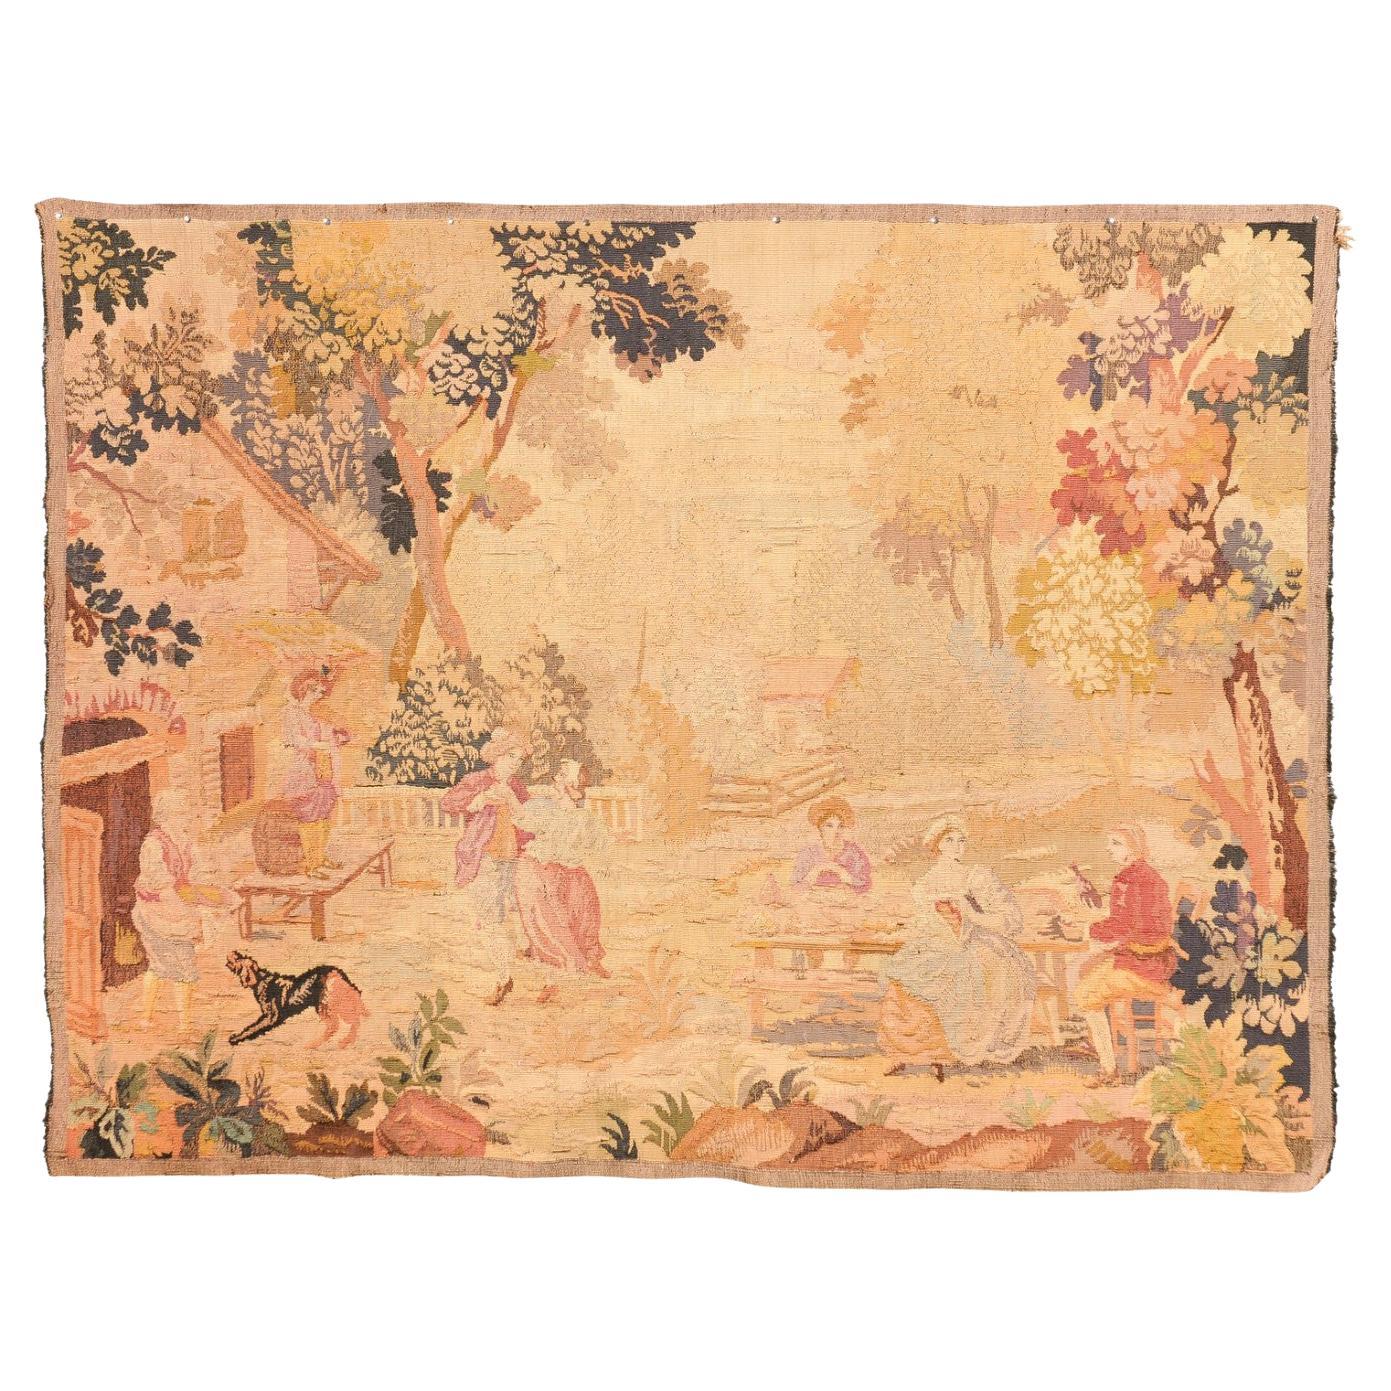 19th Century Tapestry of Countryside Scene with Figures